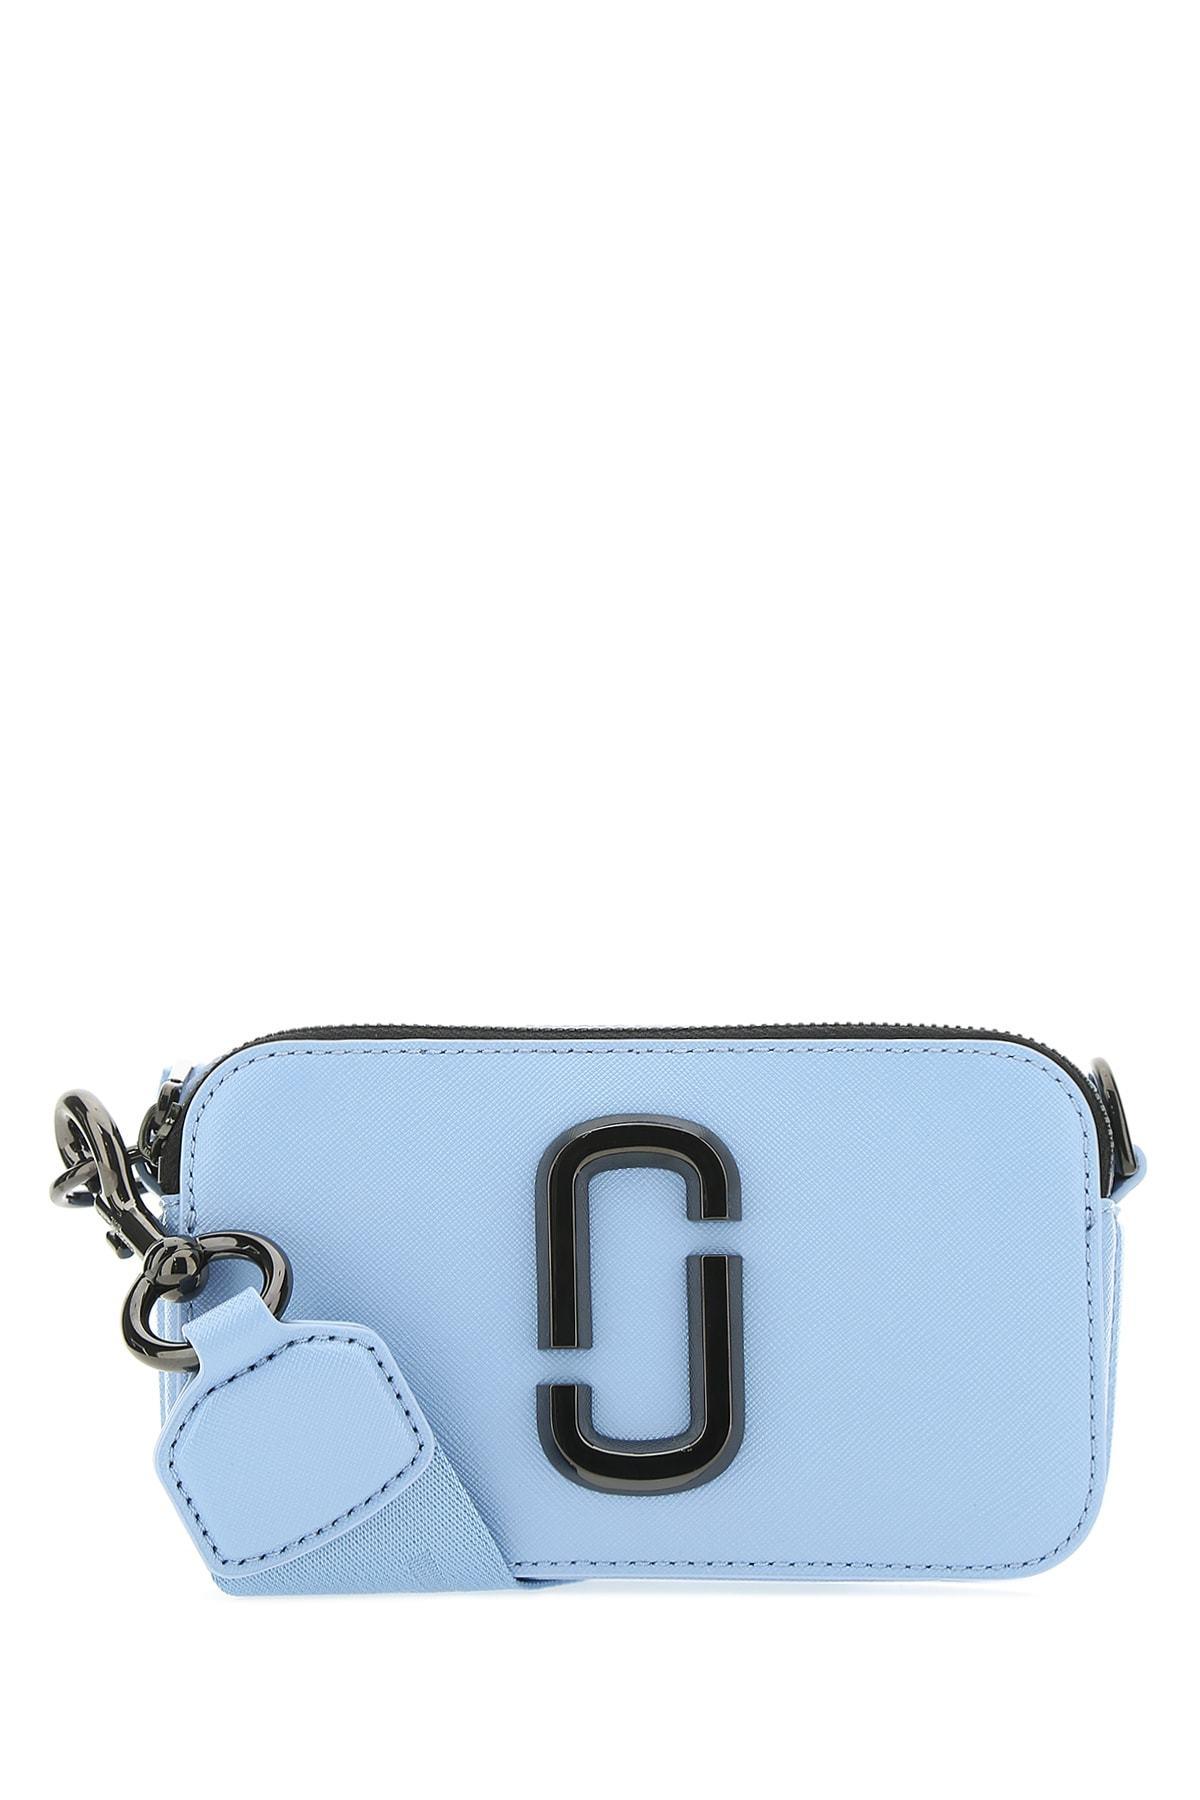 Marc Jacobs The Snapshot Bag in Blue